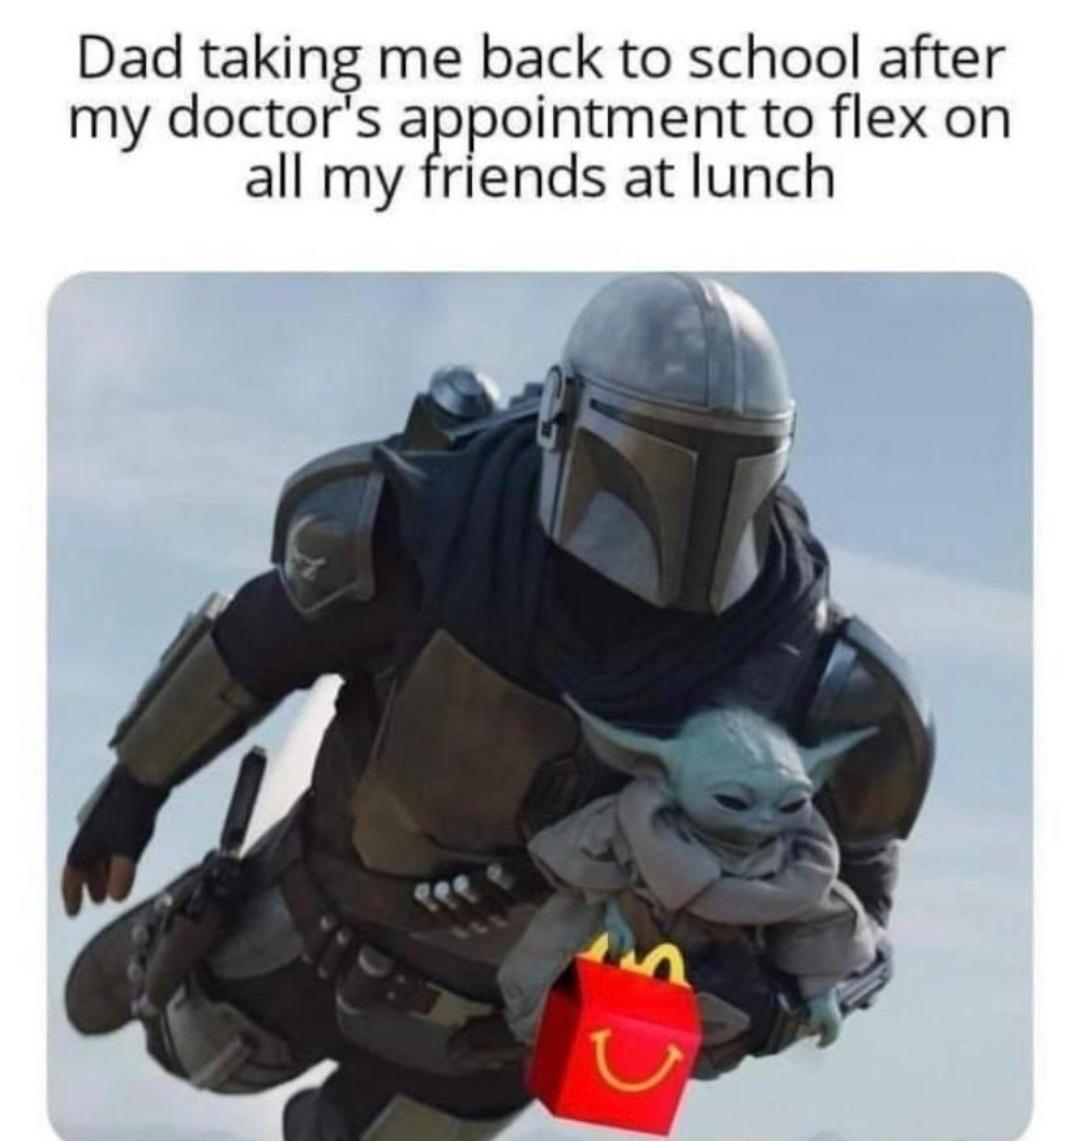 The Mandalorian - Dad taking me back to school after my doctor's appointment to flex on all my friends at lunch